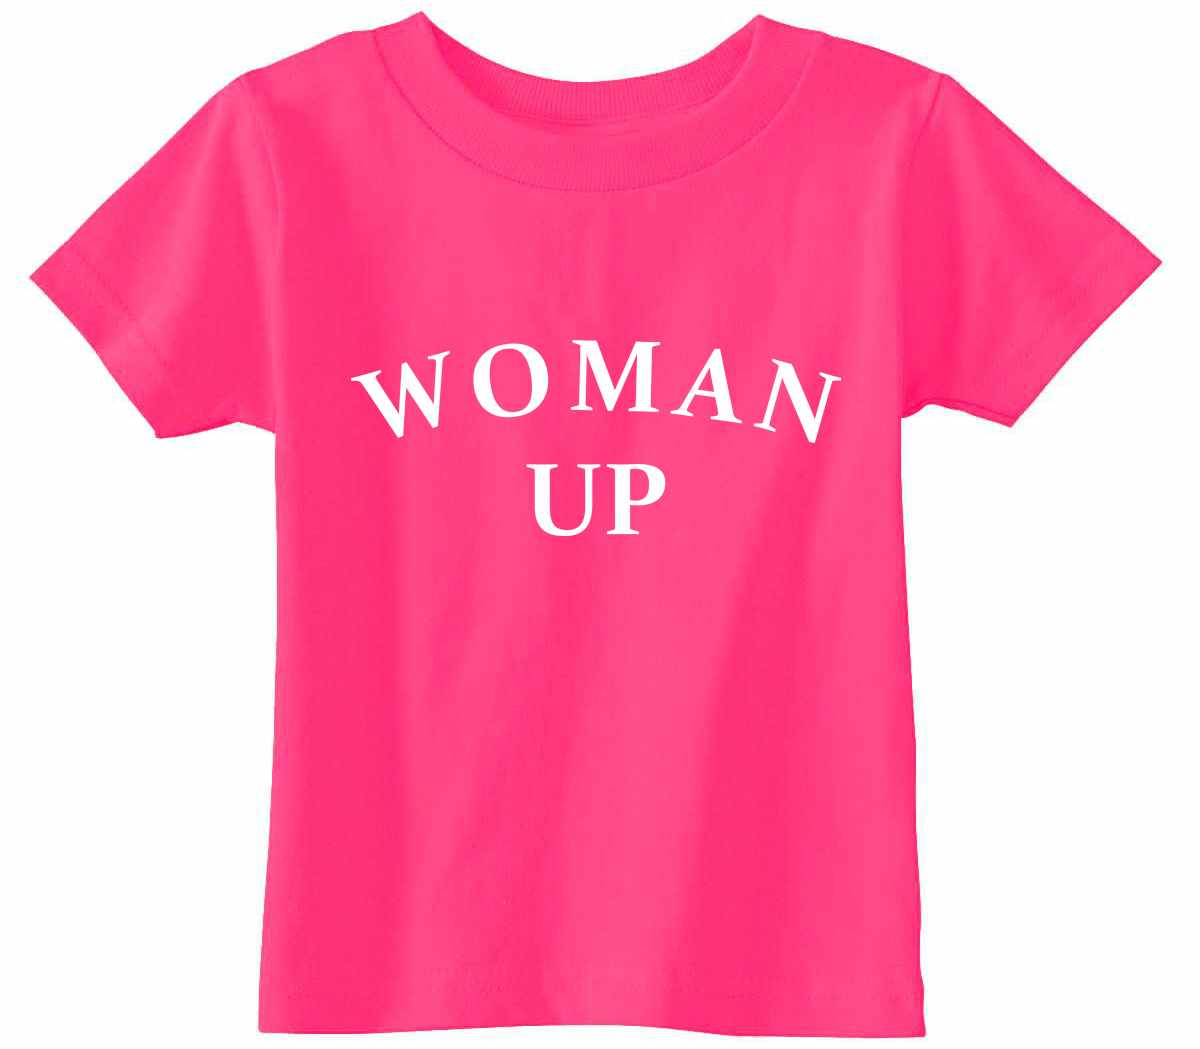 Woman Up on Infant-Toddler T-Shirt (#1010-7)